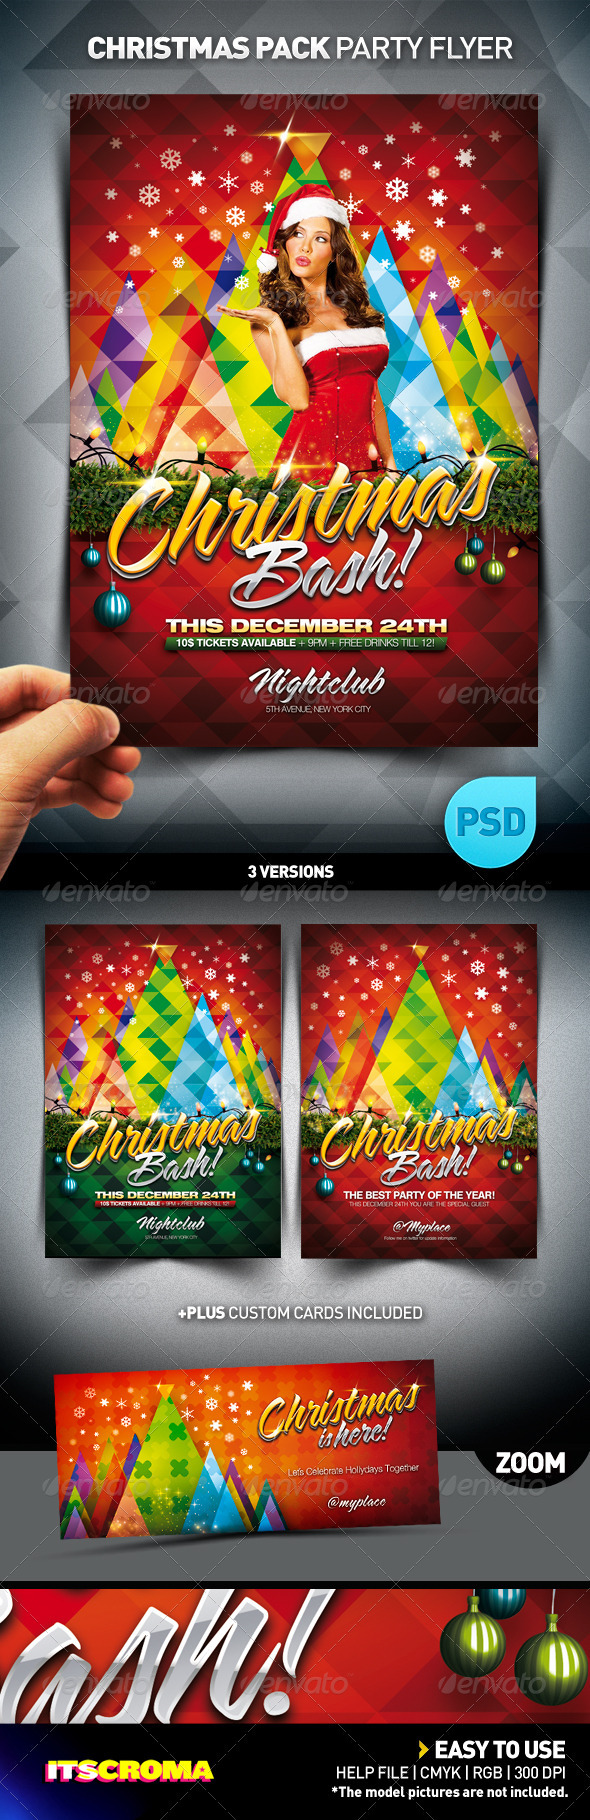 Christmas Bash Party Flyer Pack